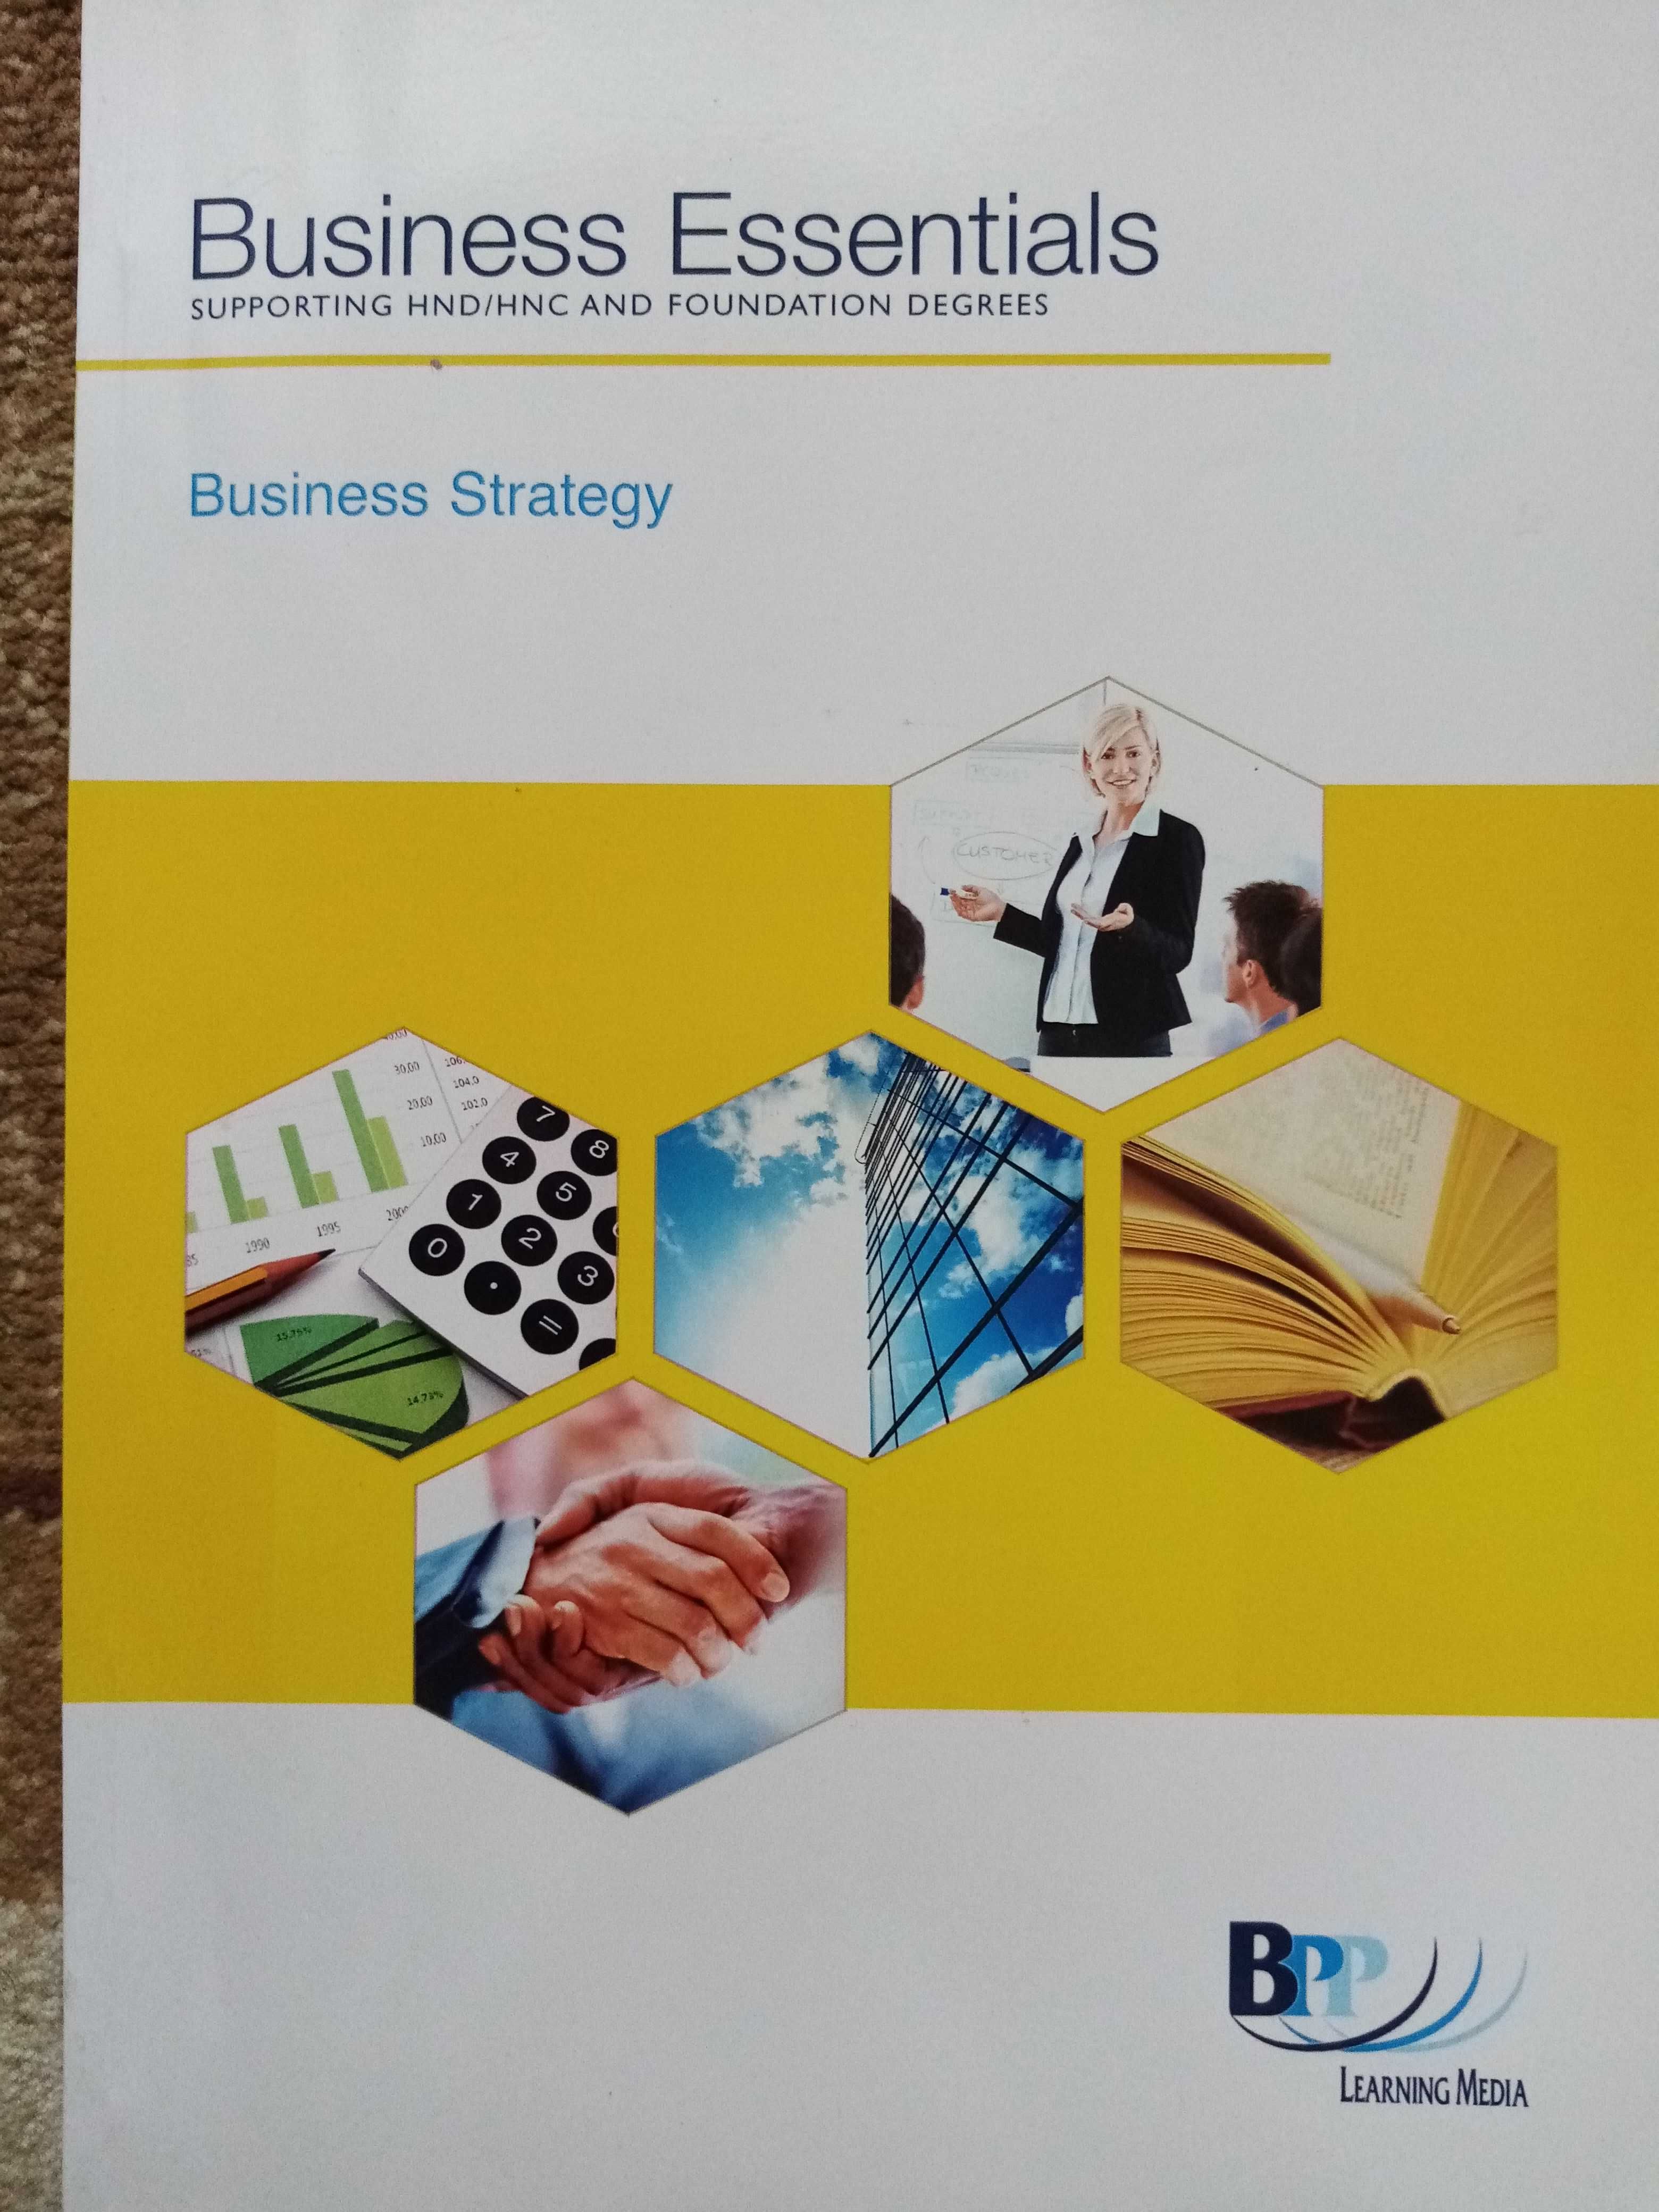 Vand o carte in engleza: Business Essentials, Business Strategy